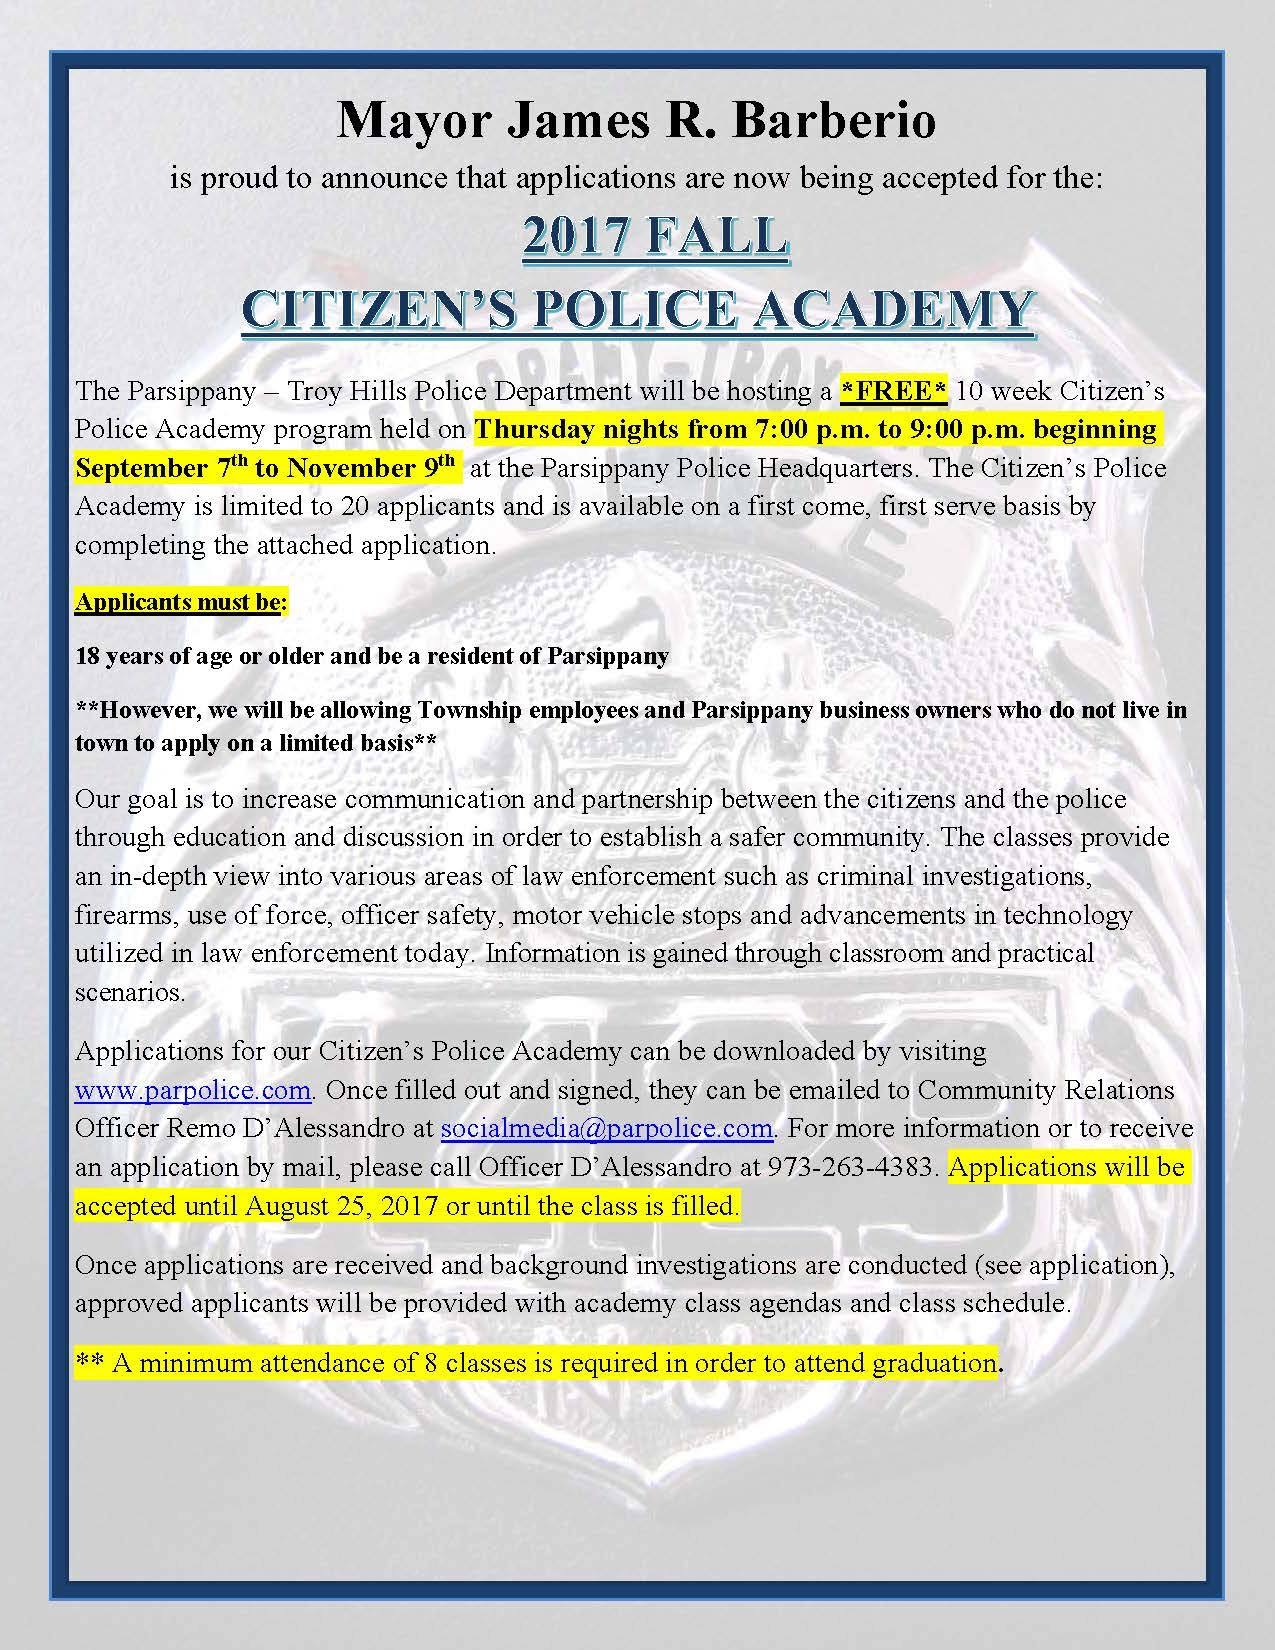 Sign ups are being held for the Citizens Police Academy